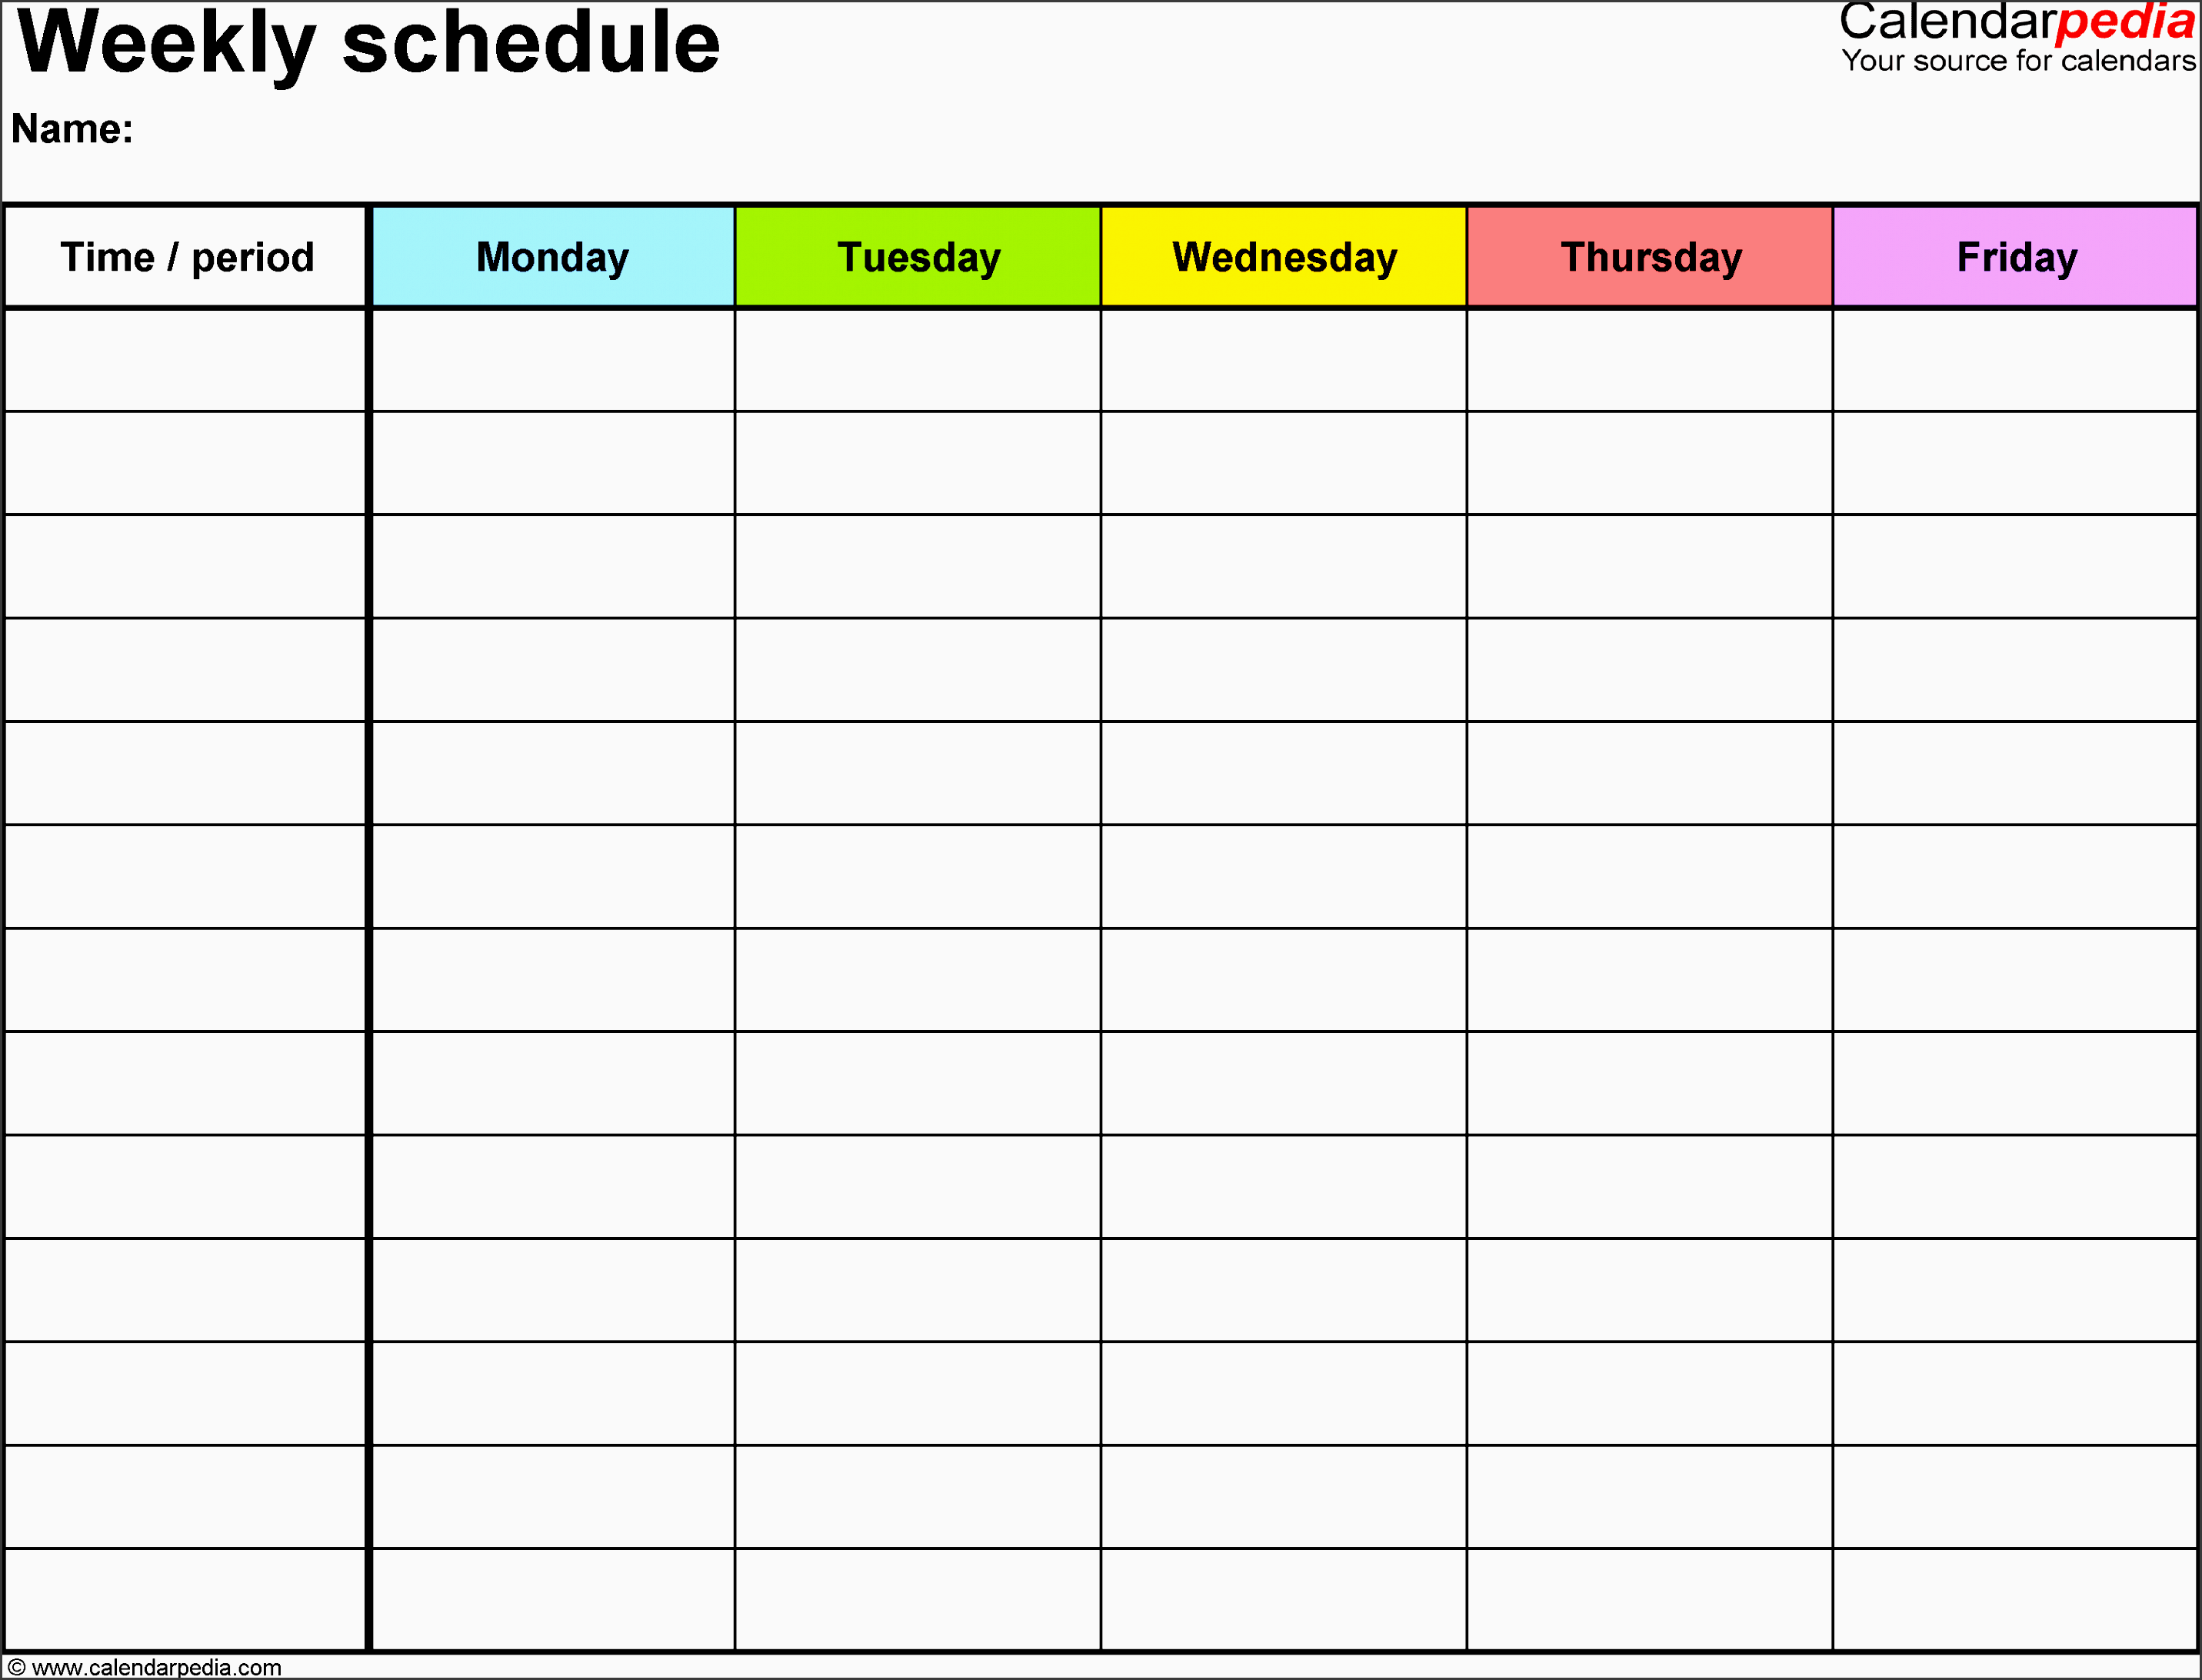 weekly schedule template for excel version 1 landscape 1 page monday to friday